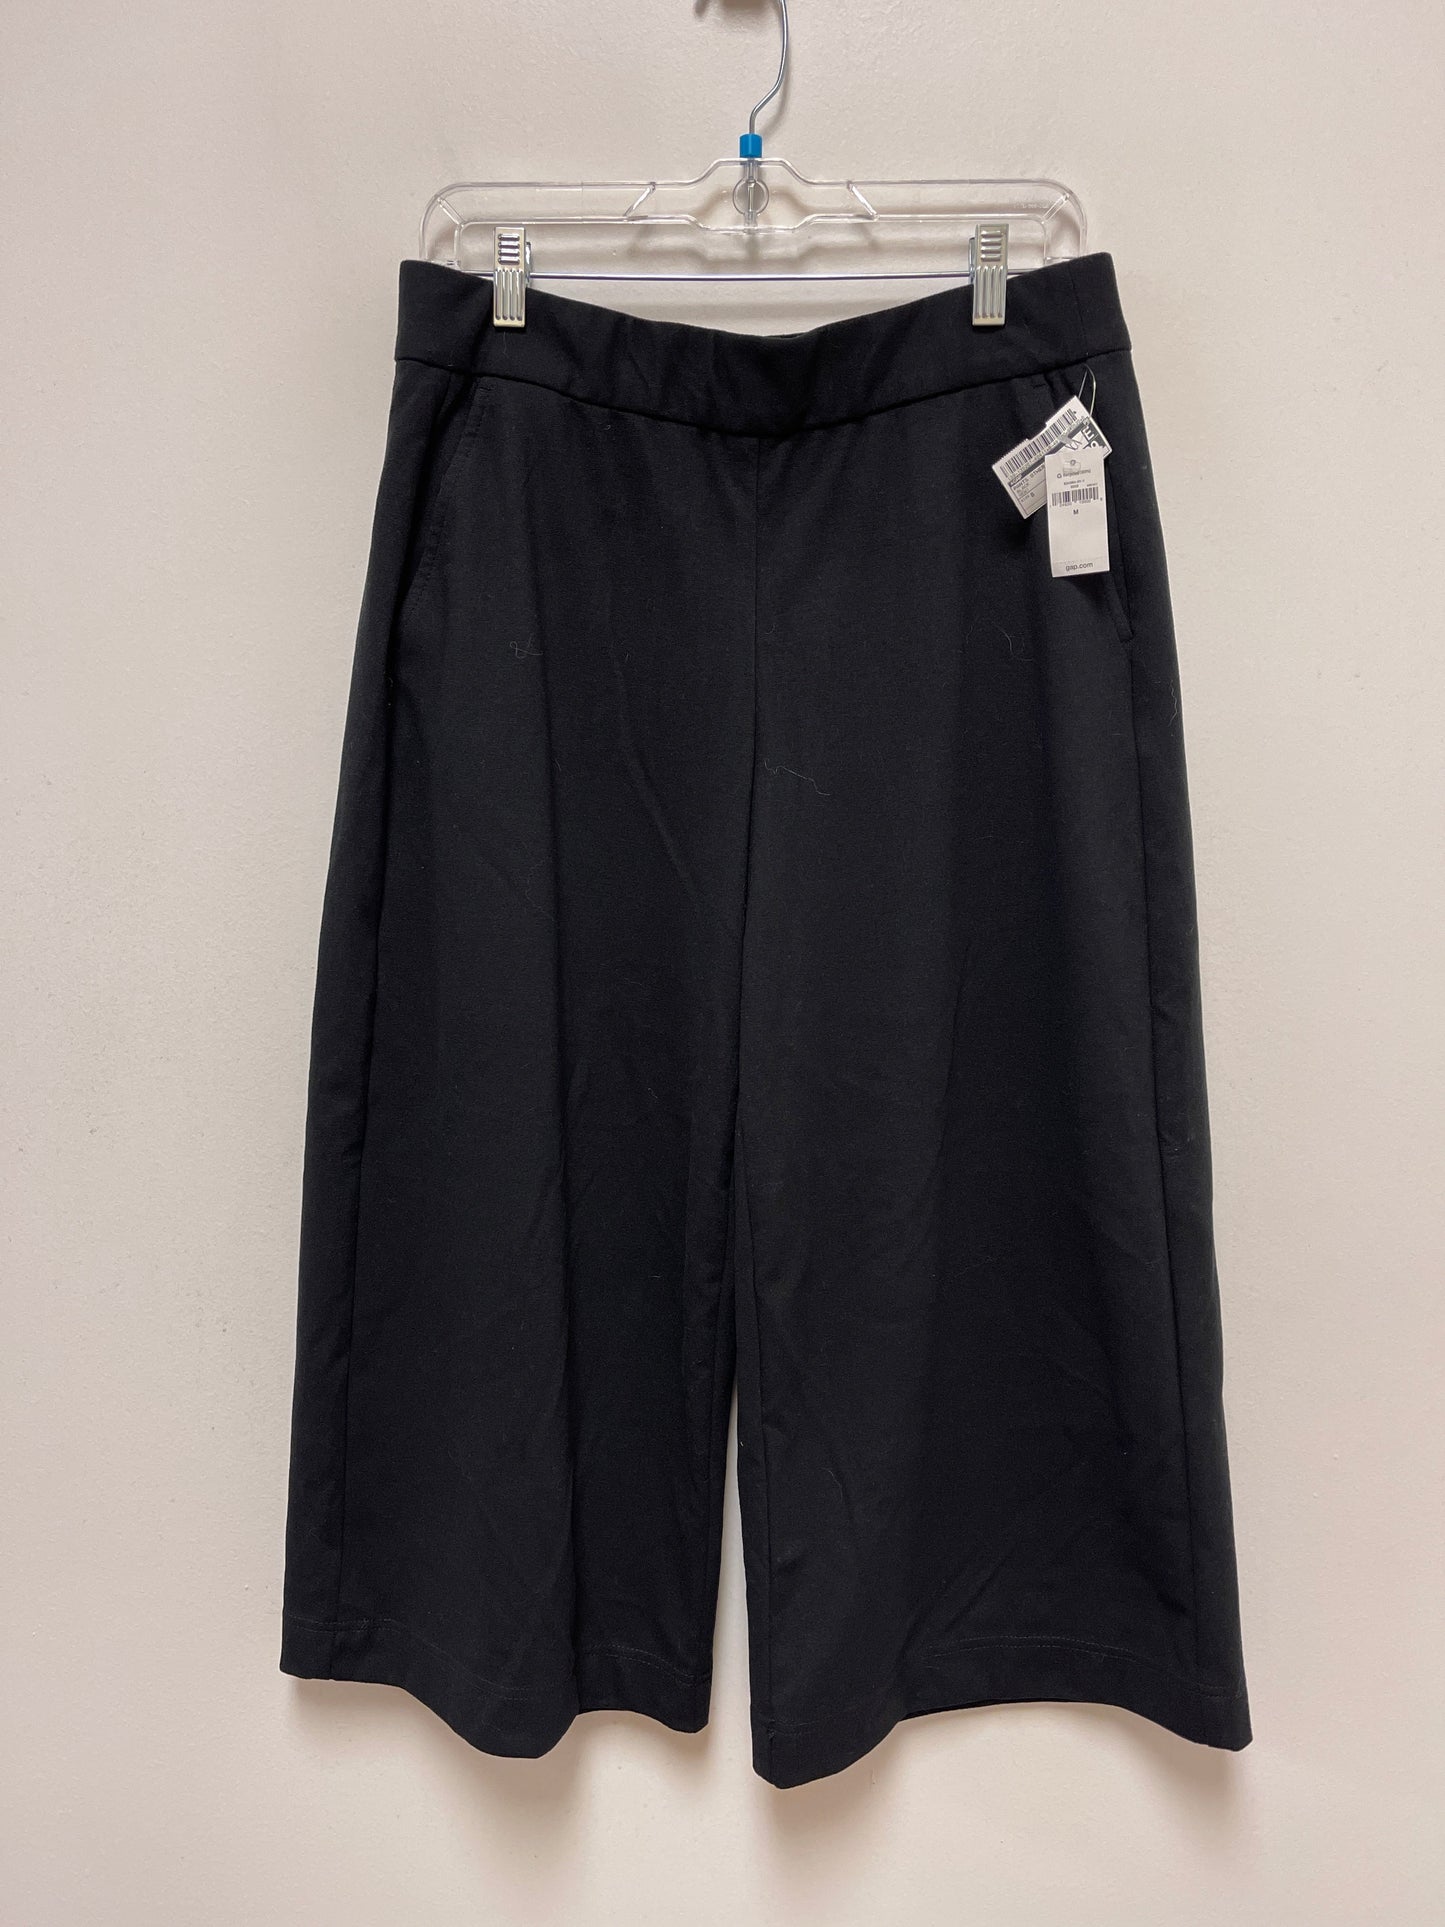 Pants Other By Gap  Size: 8